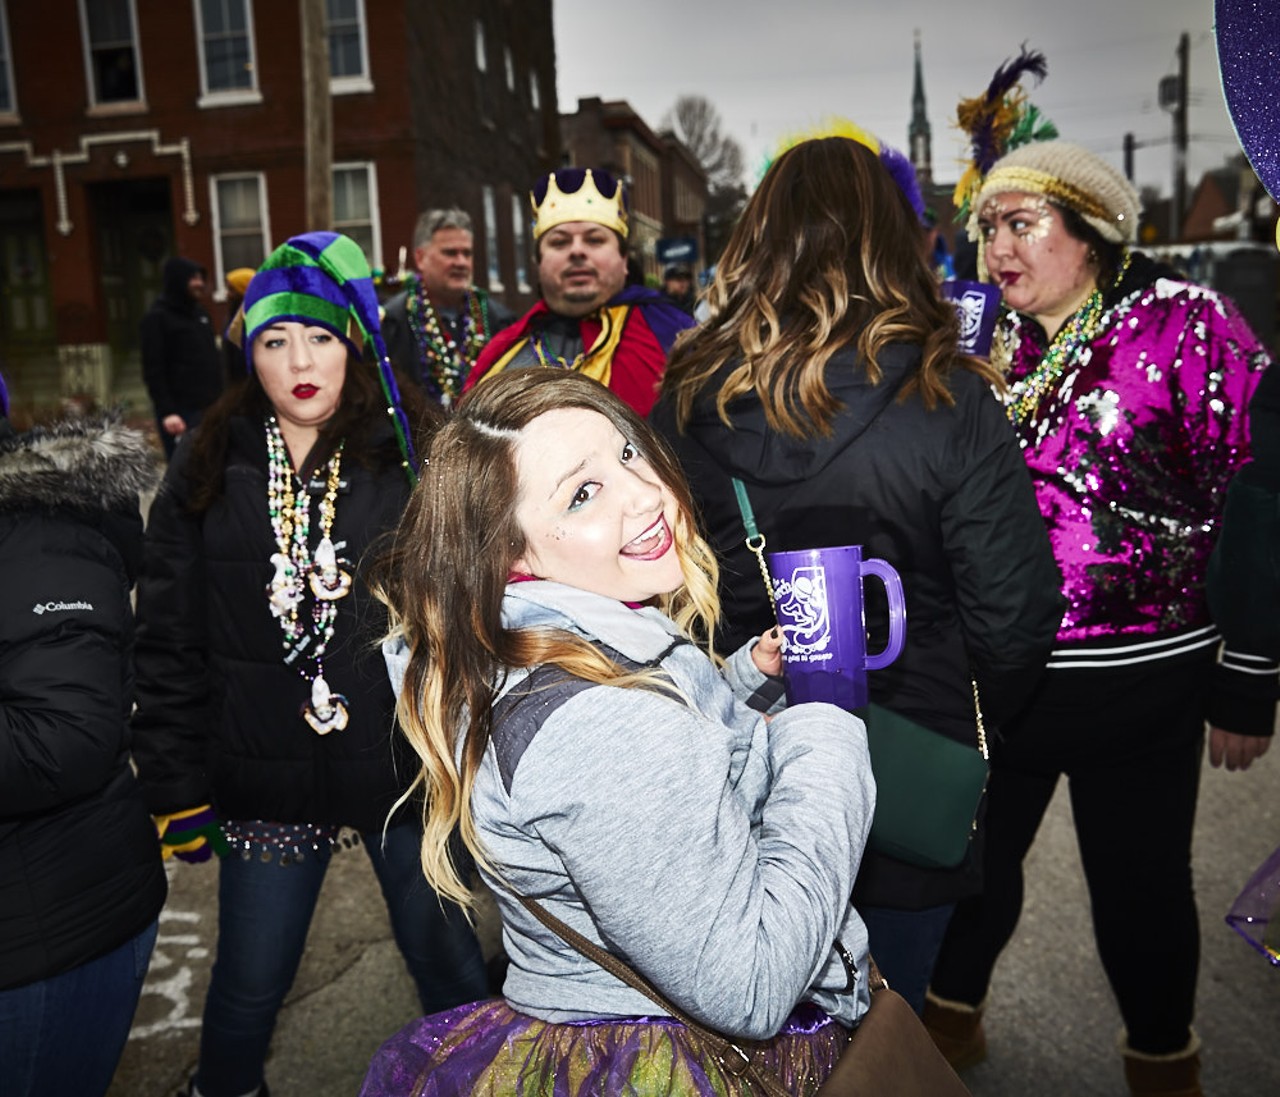 St. Louis Blues on X: Keep the party going with a Mardi Gras